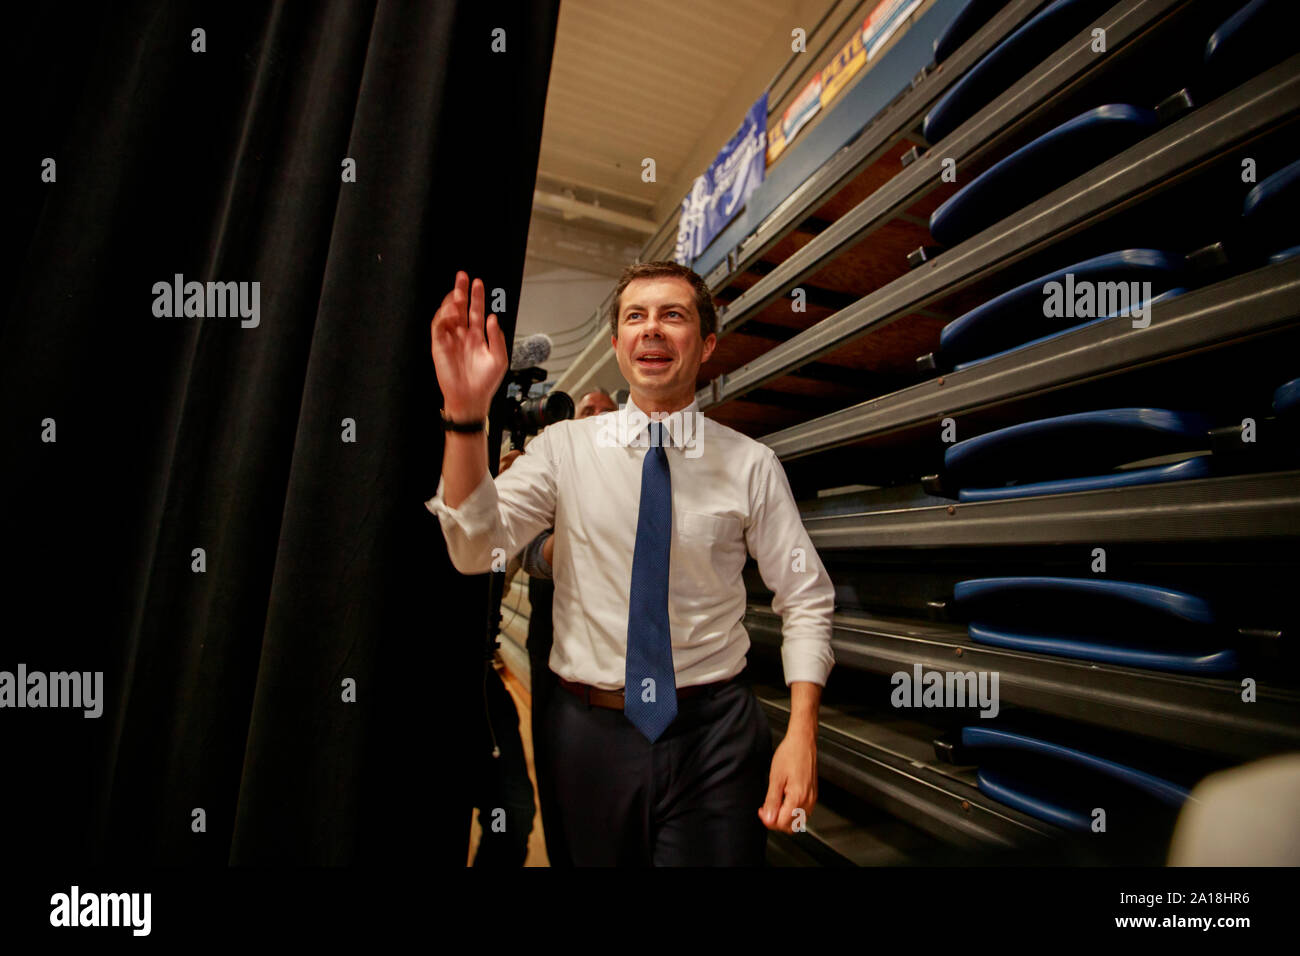 South Bend, Indiana Mayor Pete Buttigieg, who is running for the Democratic nomination for president of the United States, campaigns Tuesday, September 24, 2019 at St. Ambrose University in Davenport, Iowa. Buttigieg was on a four day campaign bus tour of Iowa. Stock Photo